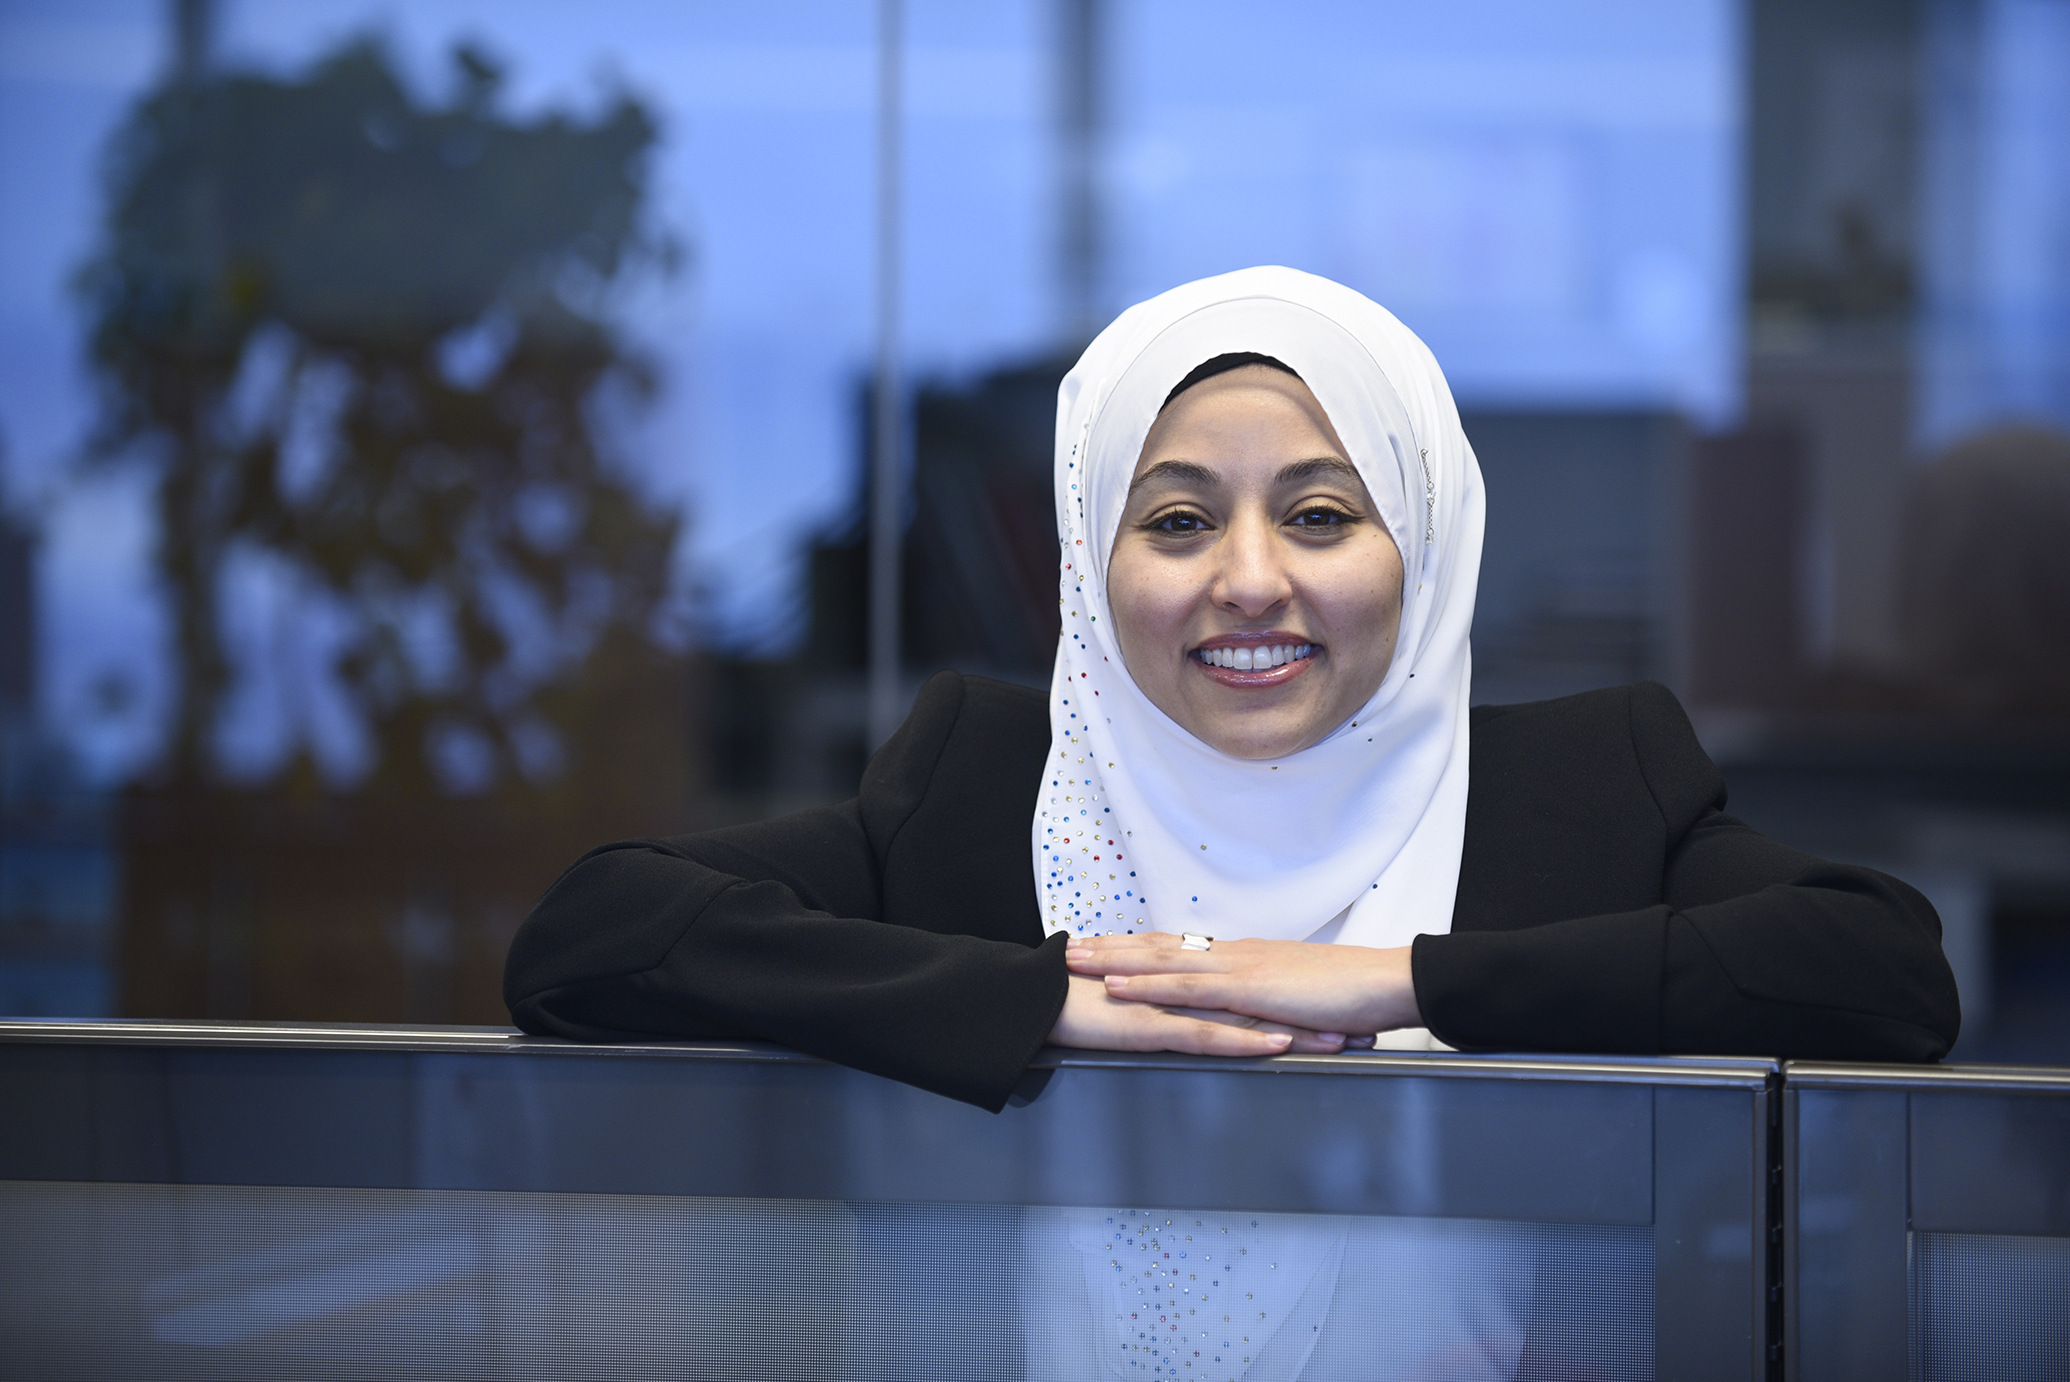 Hager Osman wears a jeweled hijab and leans with both arms over a top edge of a desk.